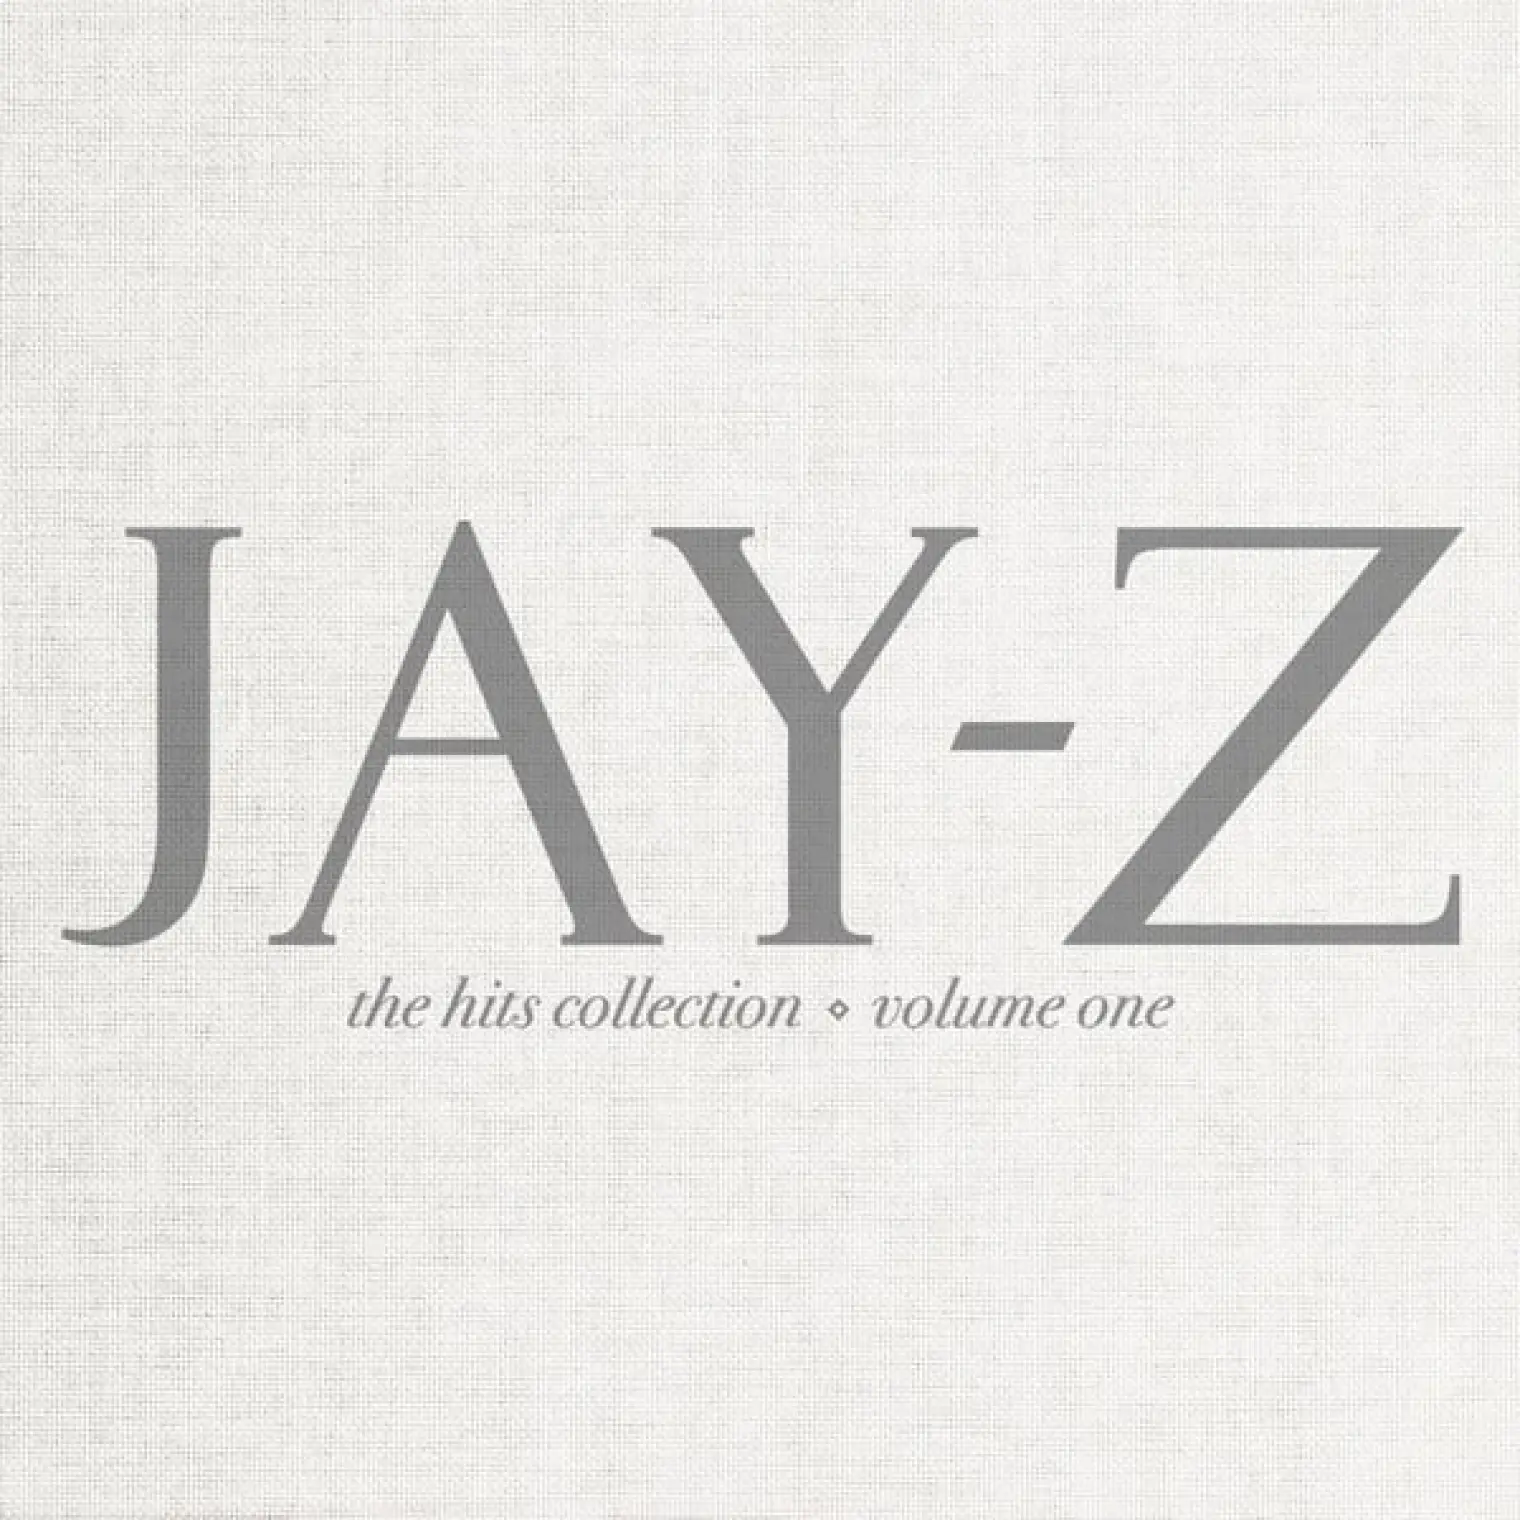 The Hits Collection Volume One -  Jay-z 